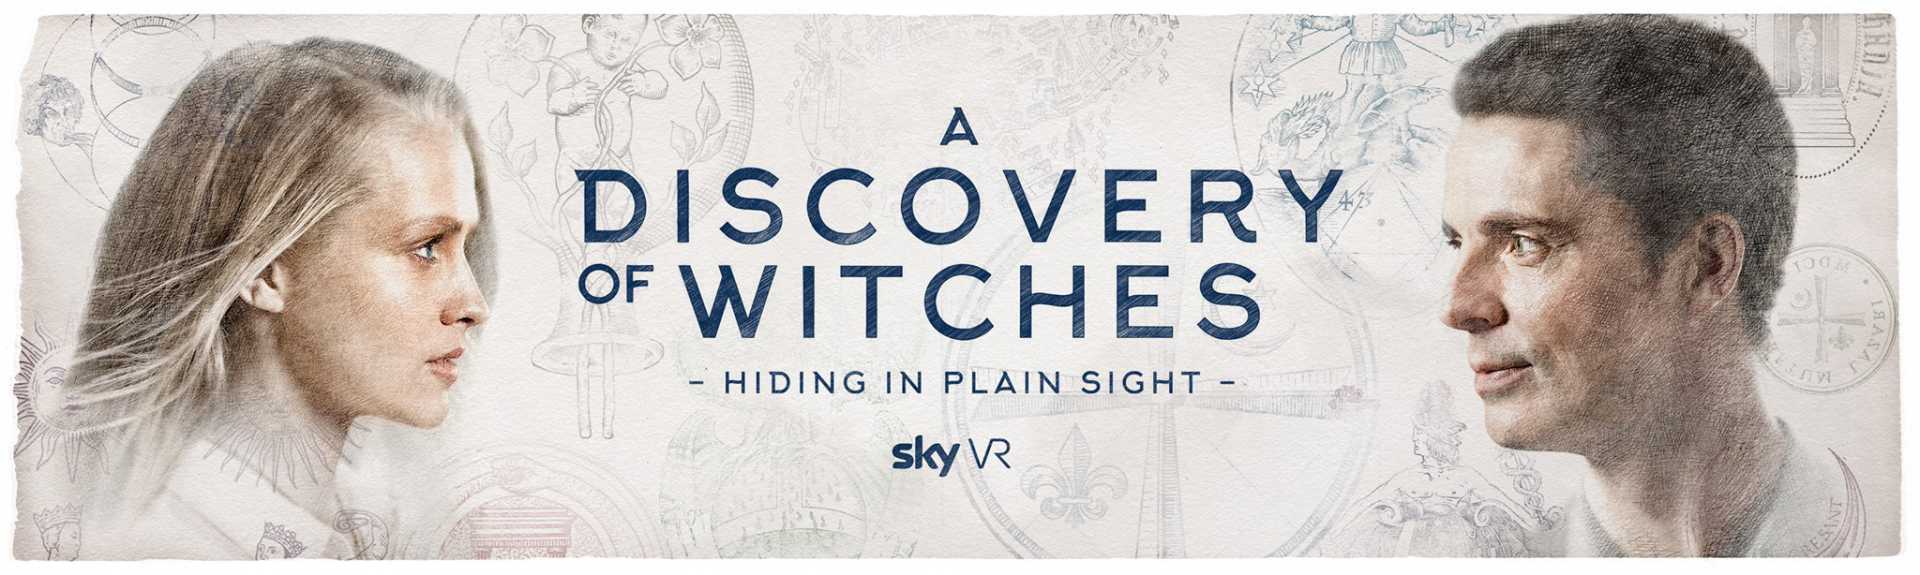 Sky VR: A Discovery of Witches – Hiding in Plain Sight